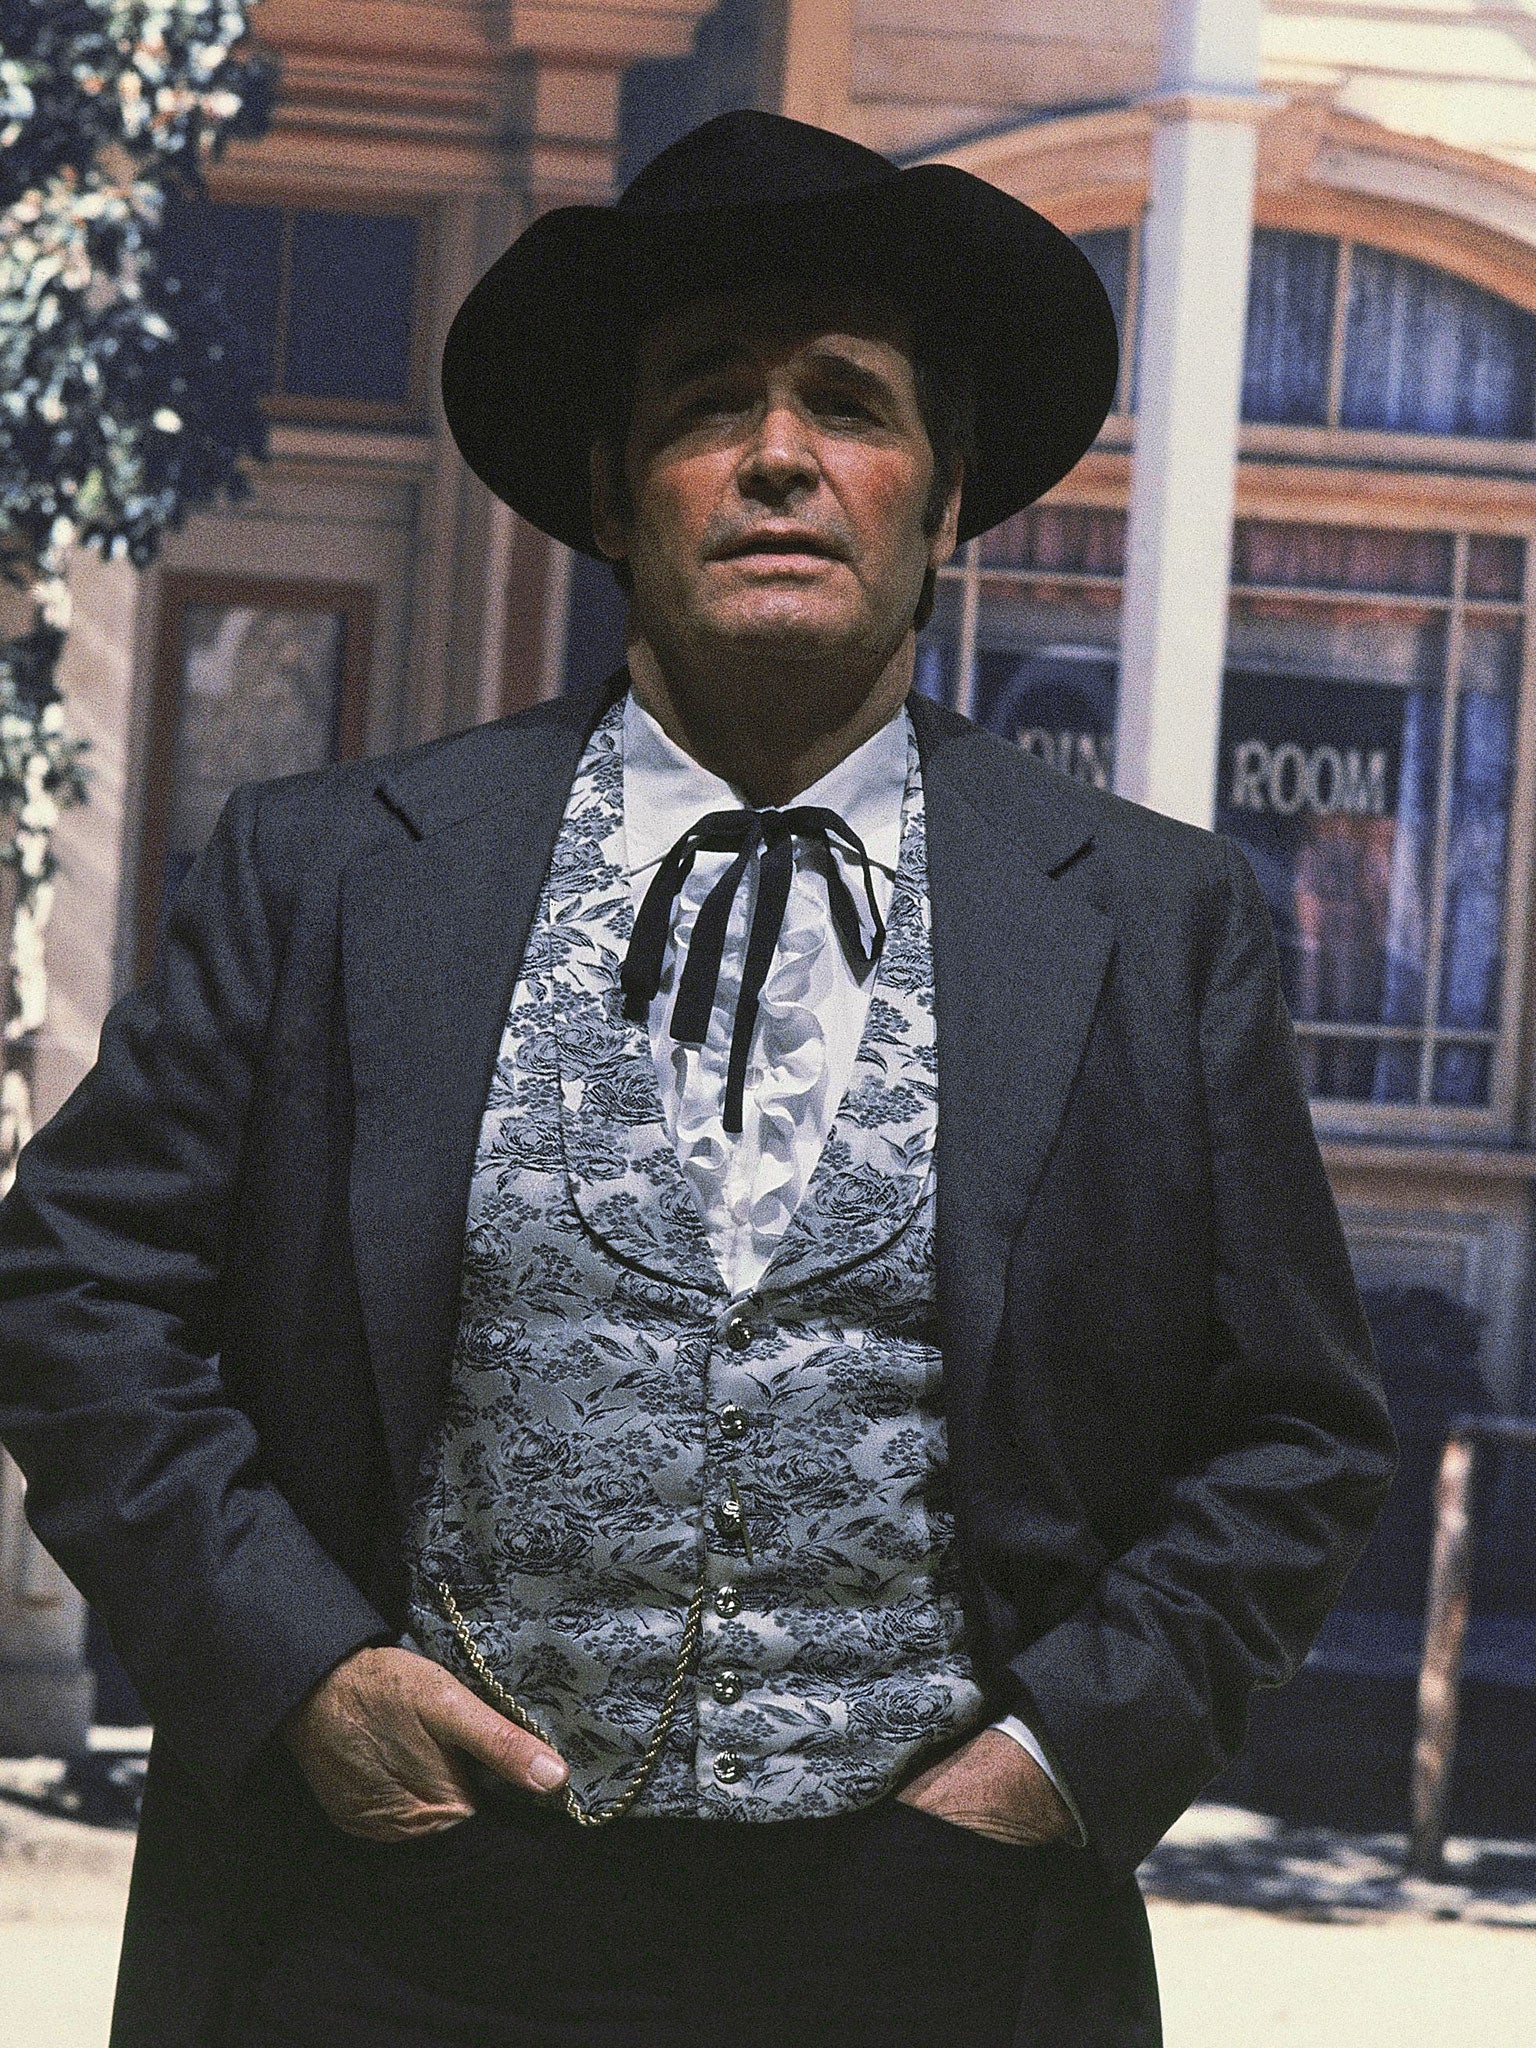 James Garner reprising the role of Bret Maverick for a television sequel series in 1982